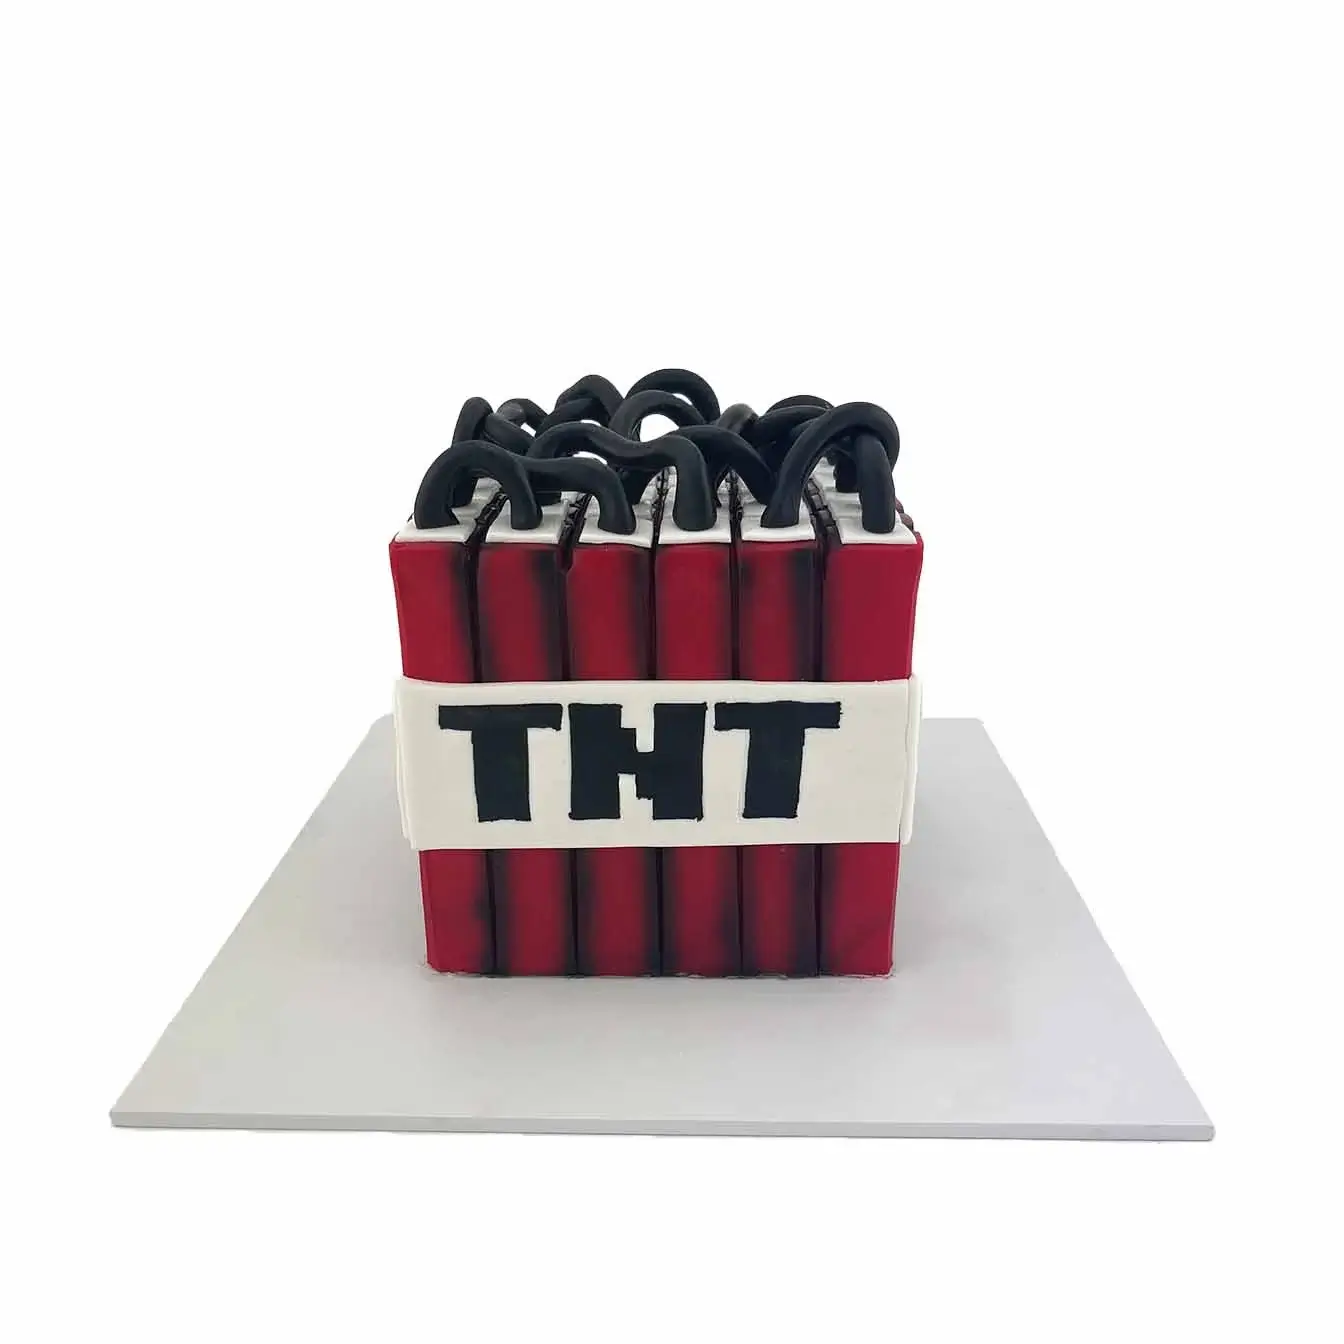 Minecraft TNT Blast Cake - A cake inspired by the TNT block from Minecraft, with vibrant red design, a perfect centerpiece for gamers and Minecraft enthusiasts.